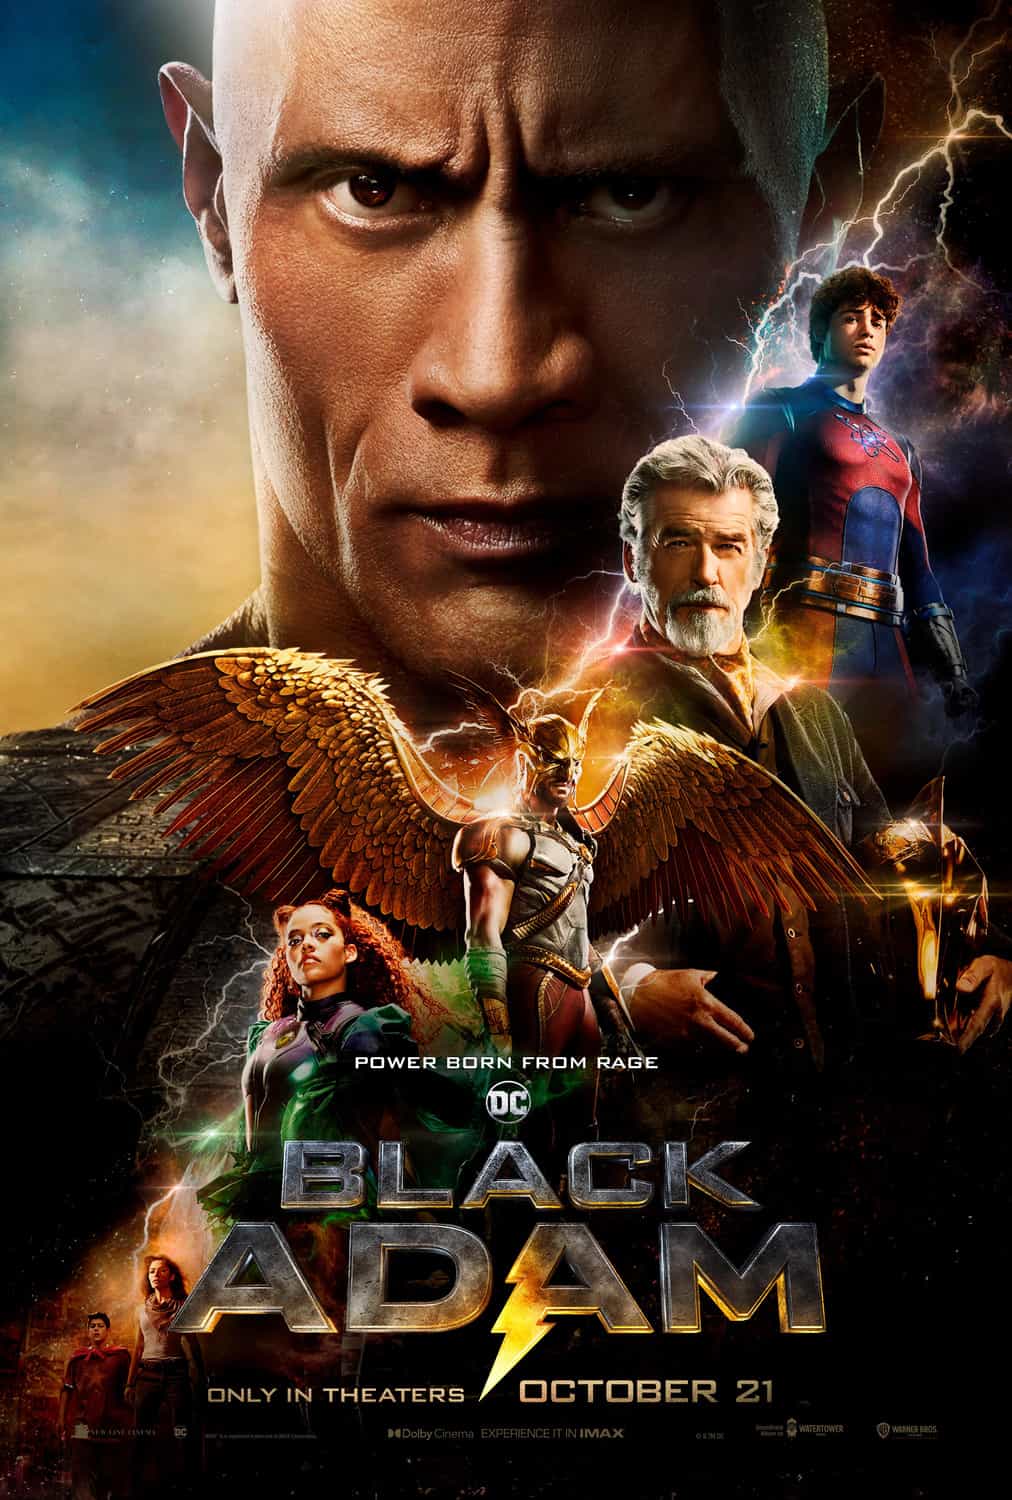 UK Box Office Weekend Report 28th - 30th October 2022: Black Adam spends a second weekend at the top in a quiet weekend at the UK box office